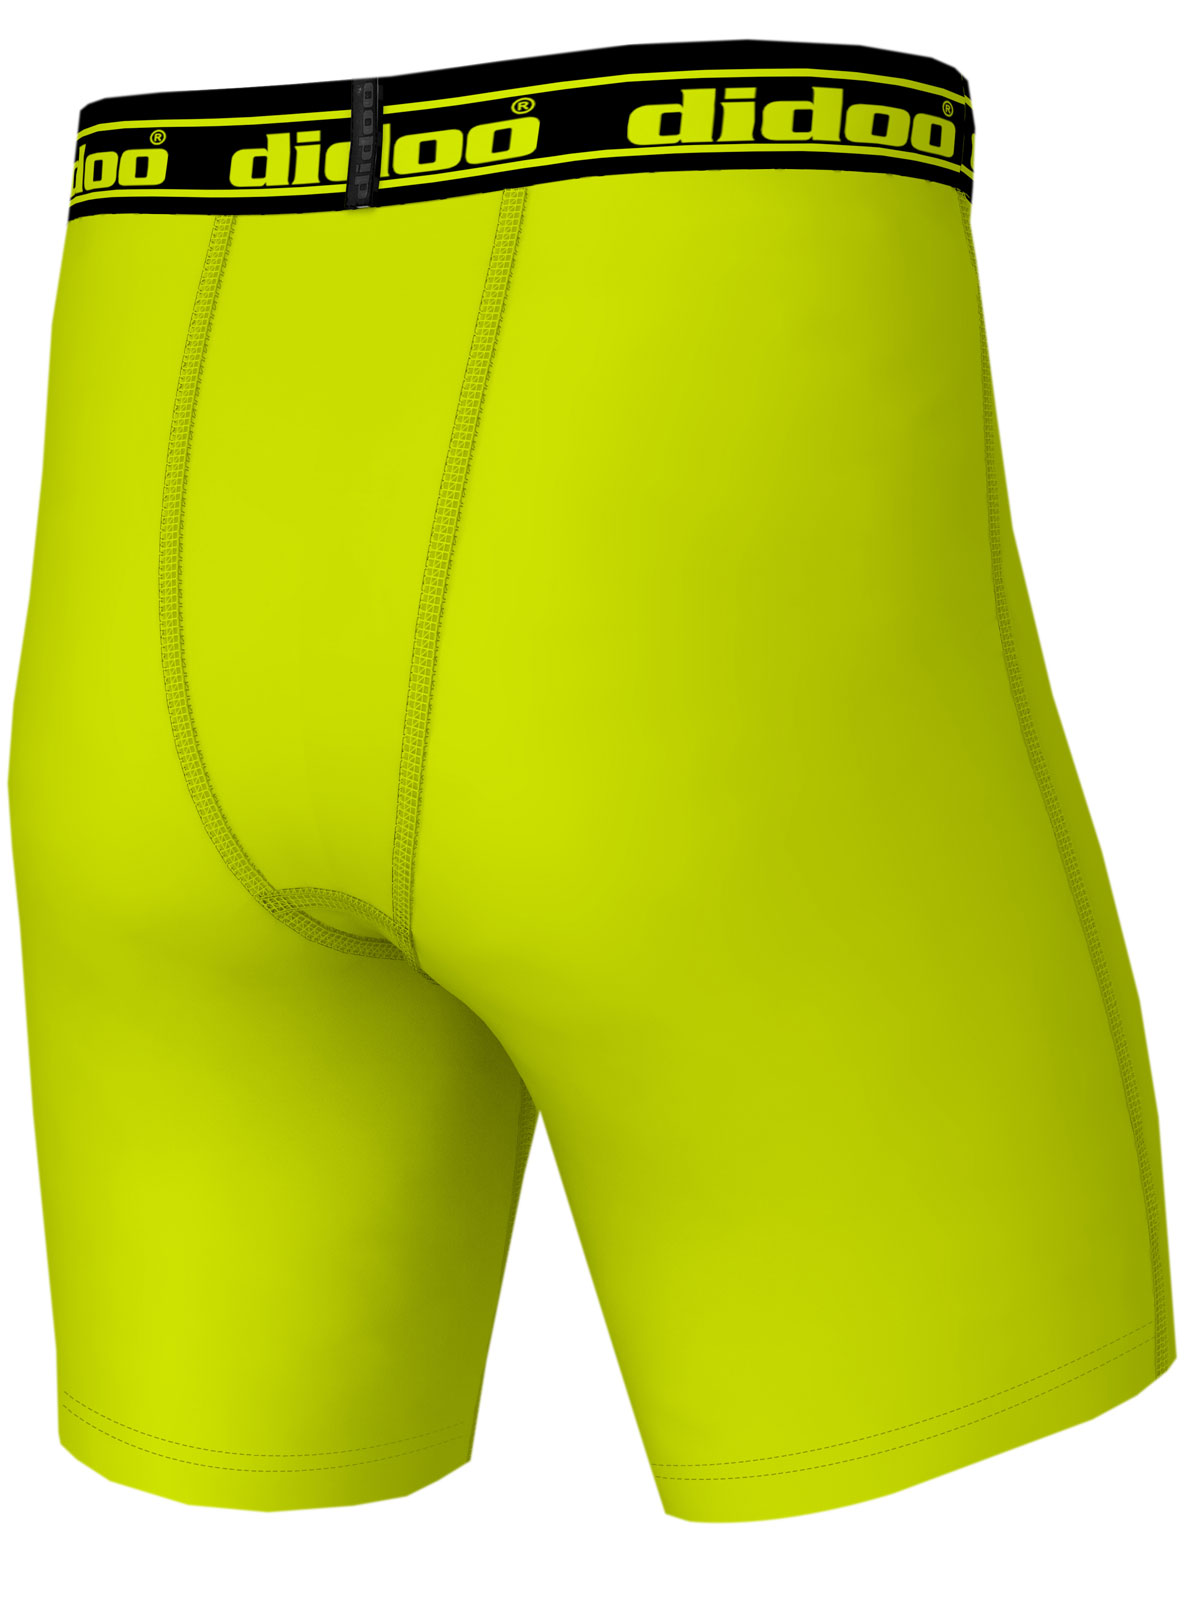 Fluorescent Yellow DiDOO Men's Compression Base Layer Shorts